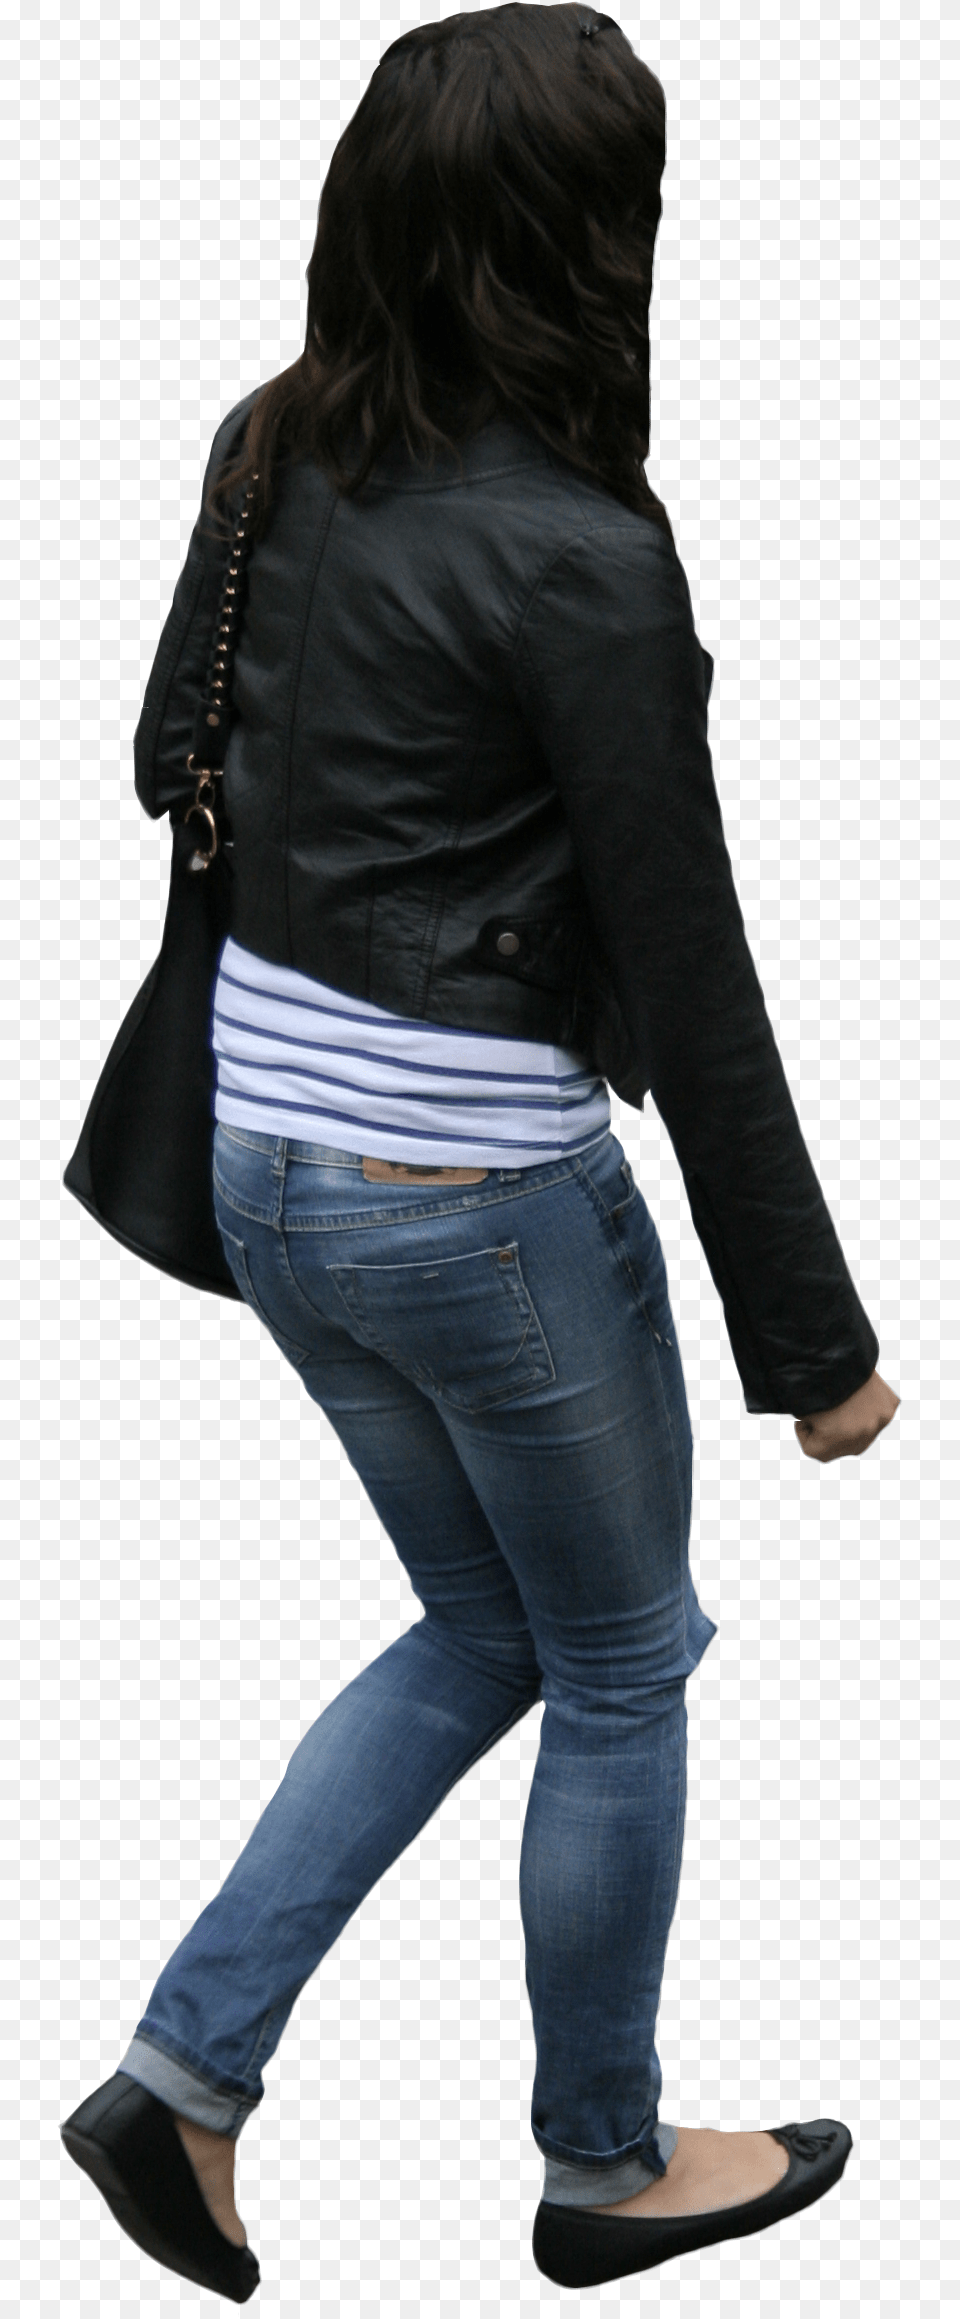 Leather Jacket Cut Out People From Above, Sleeve, Clothing, Coat, Pants Png